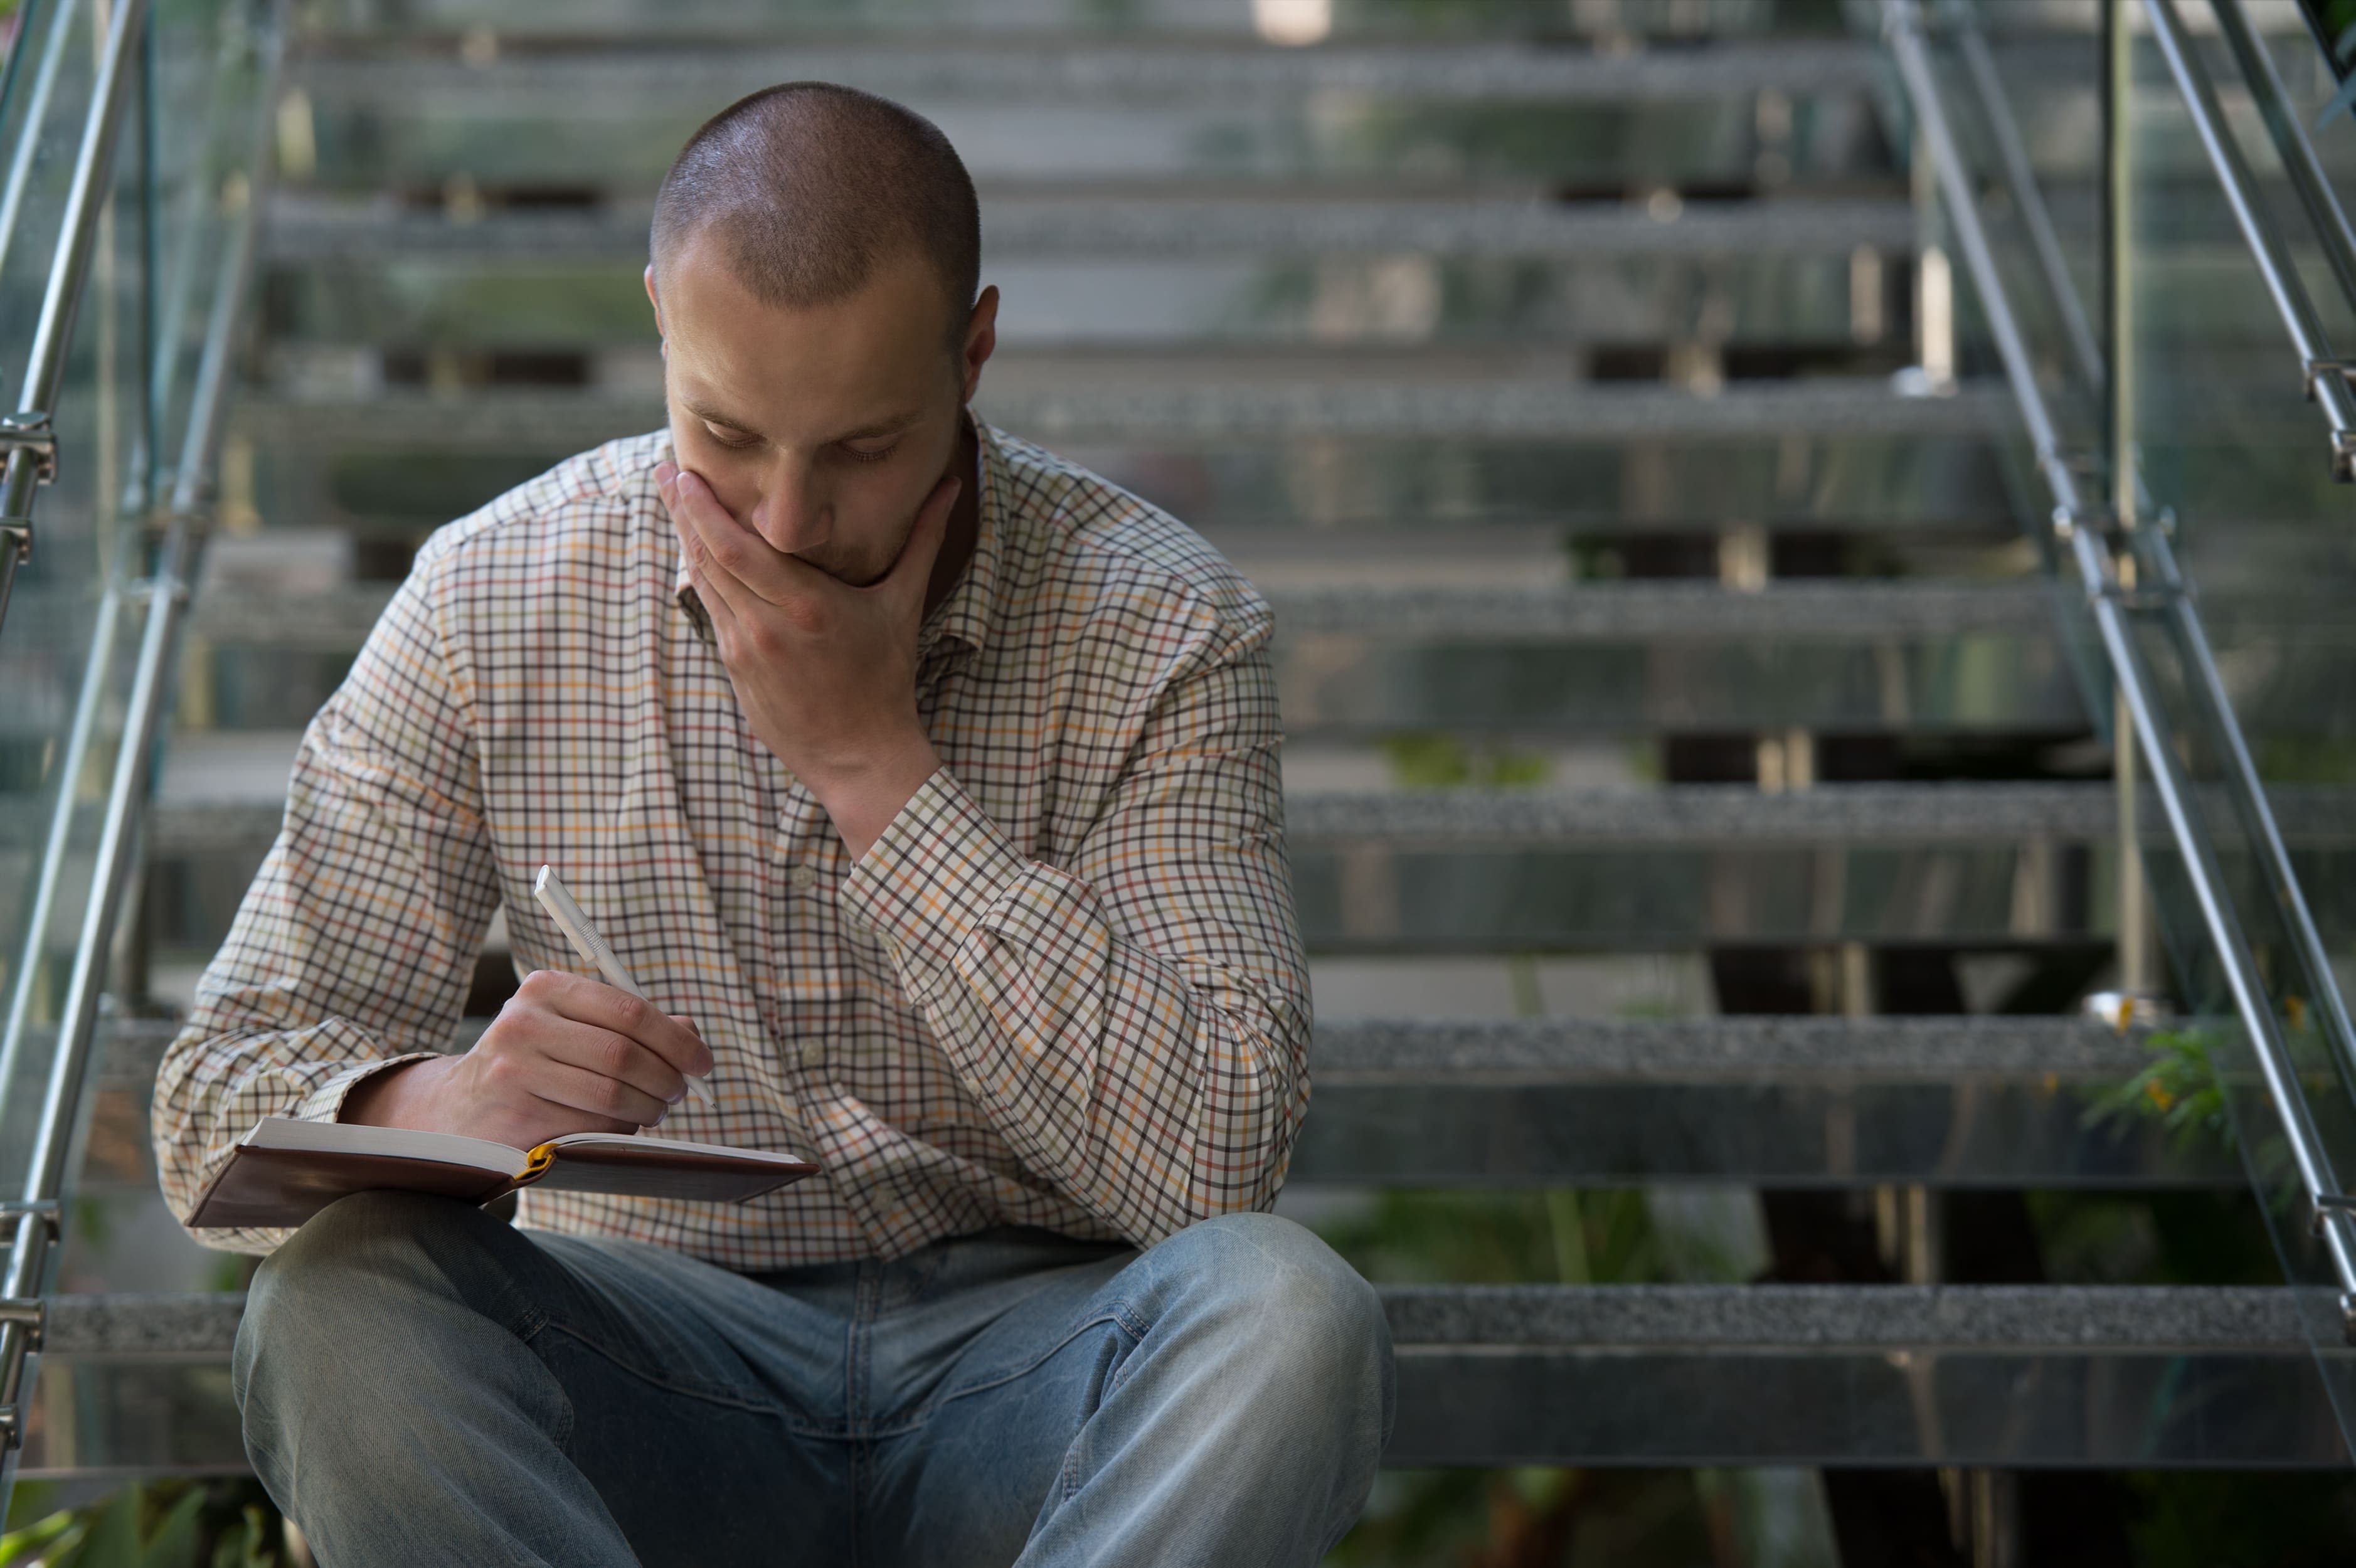 A man sitting on steps, writing on a pad of paper and looking determined.